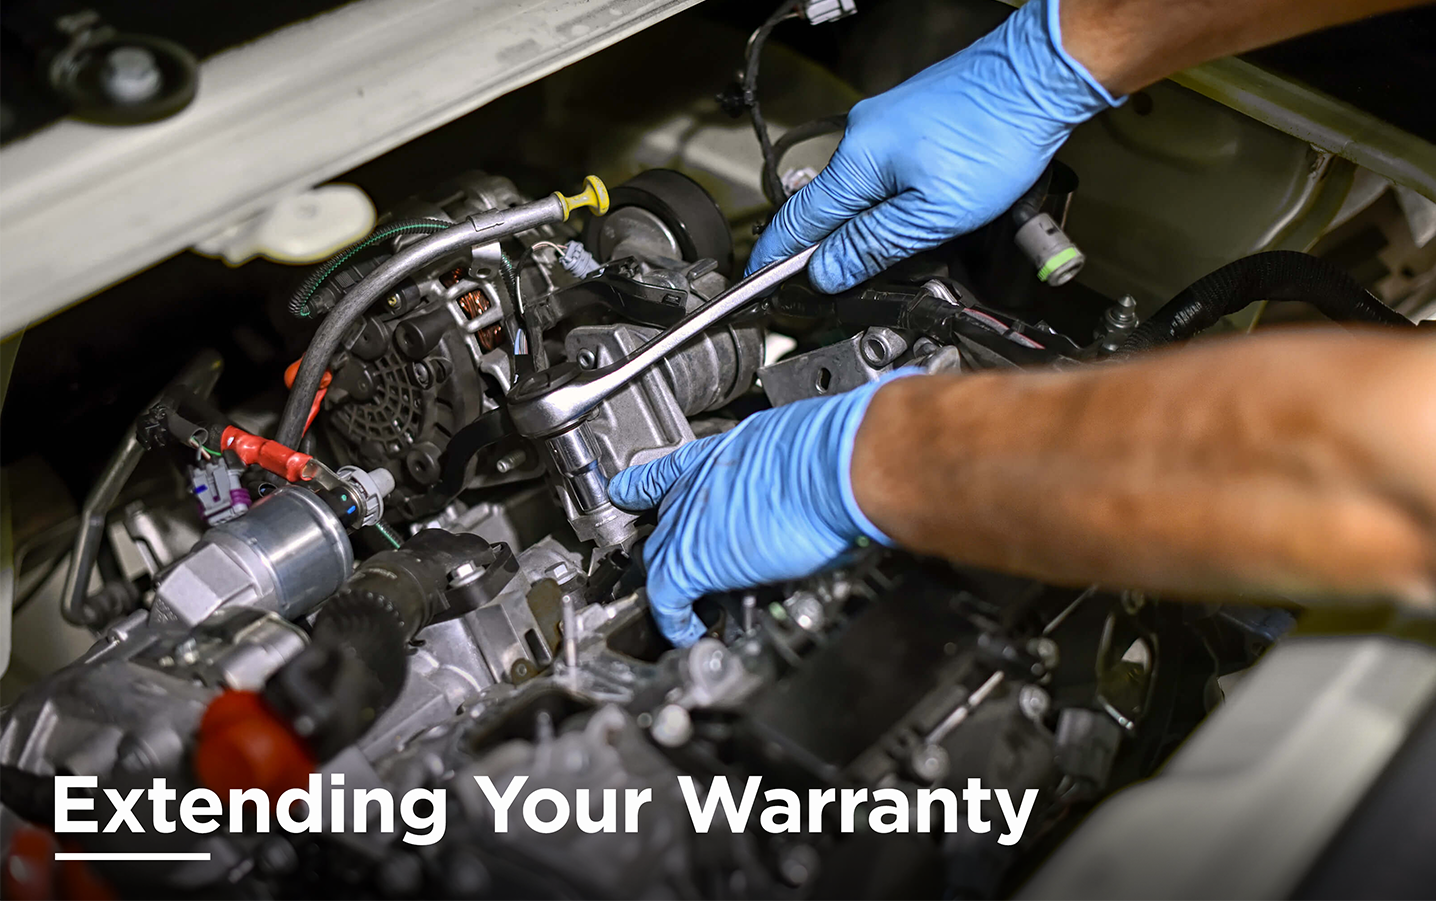 Find the Best Warranty for Used Cars | The Perfect Buying Guide